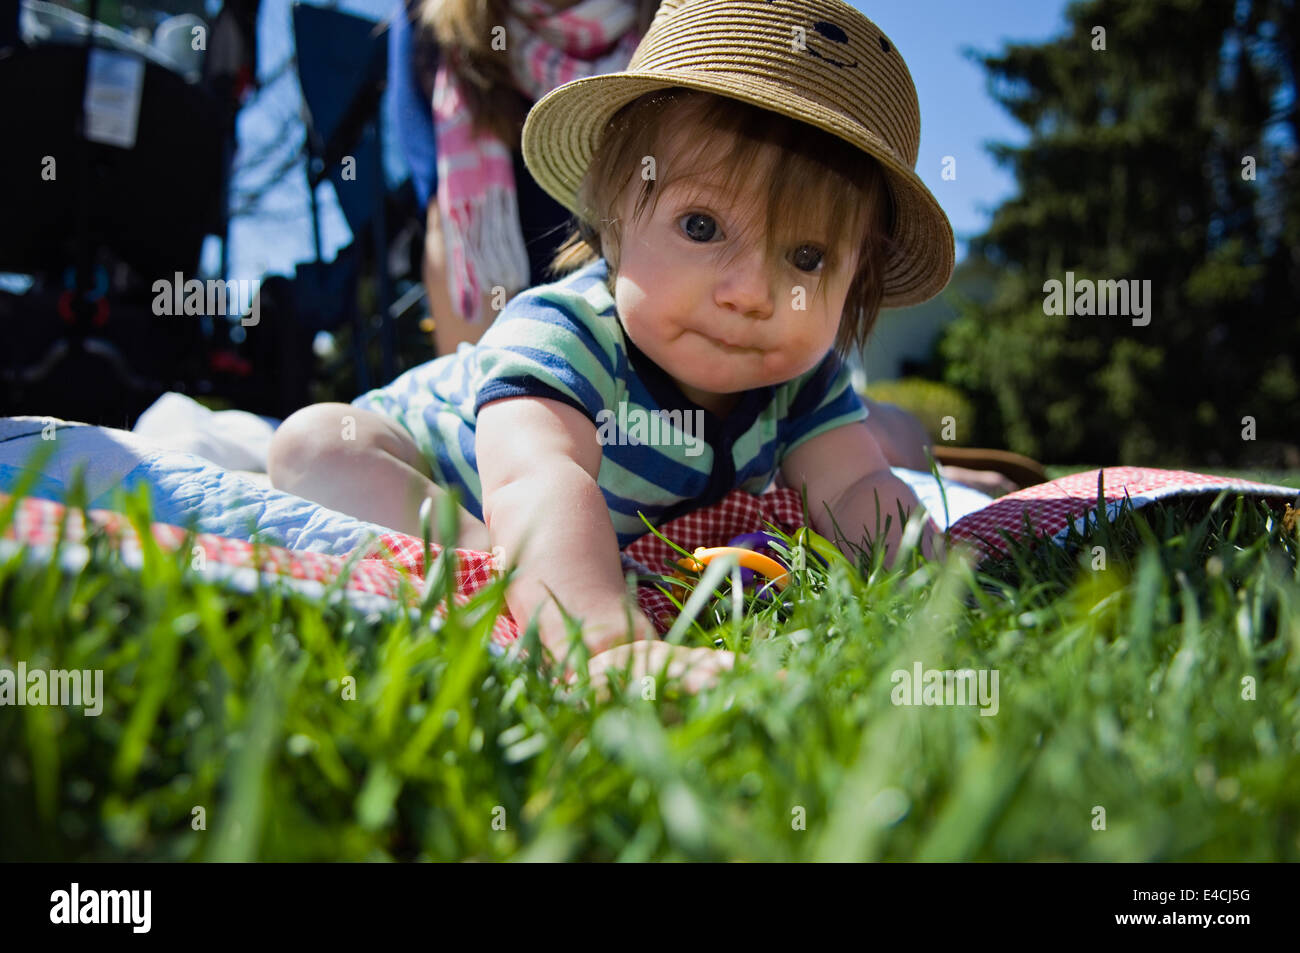 Six Month Old Baby Boy Outdoors on Blanket Stock Photo